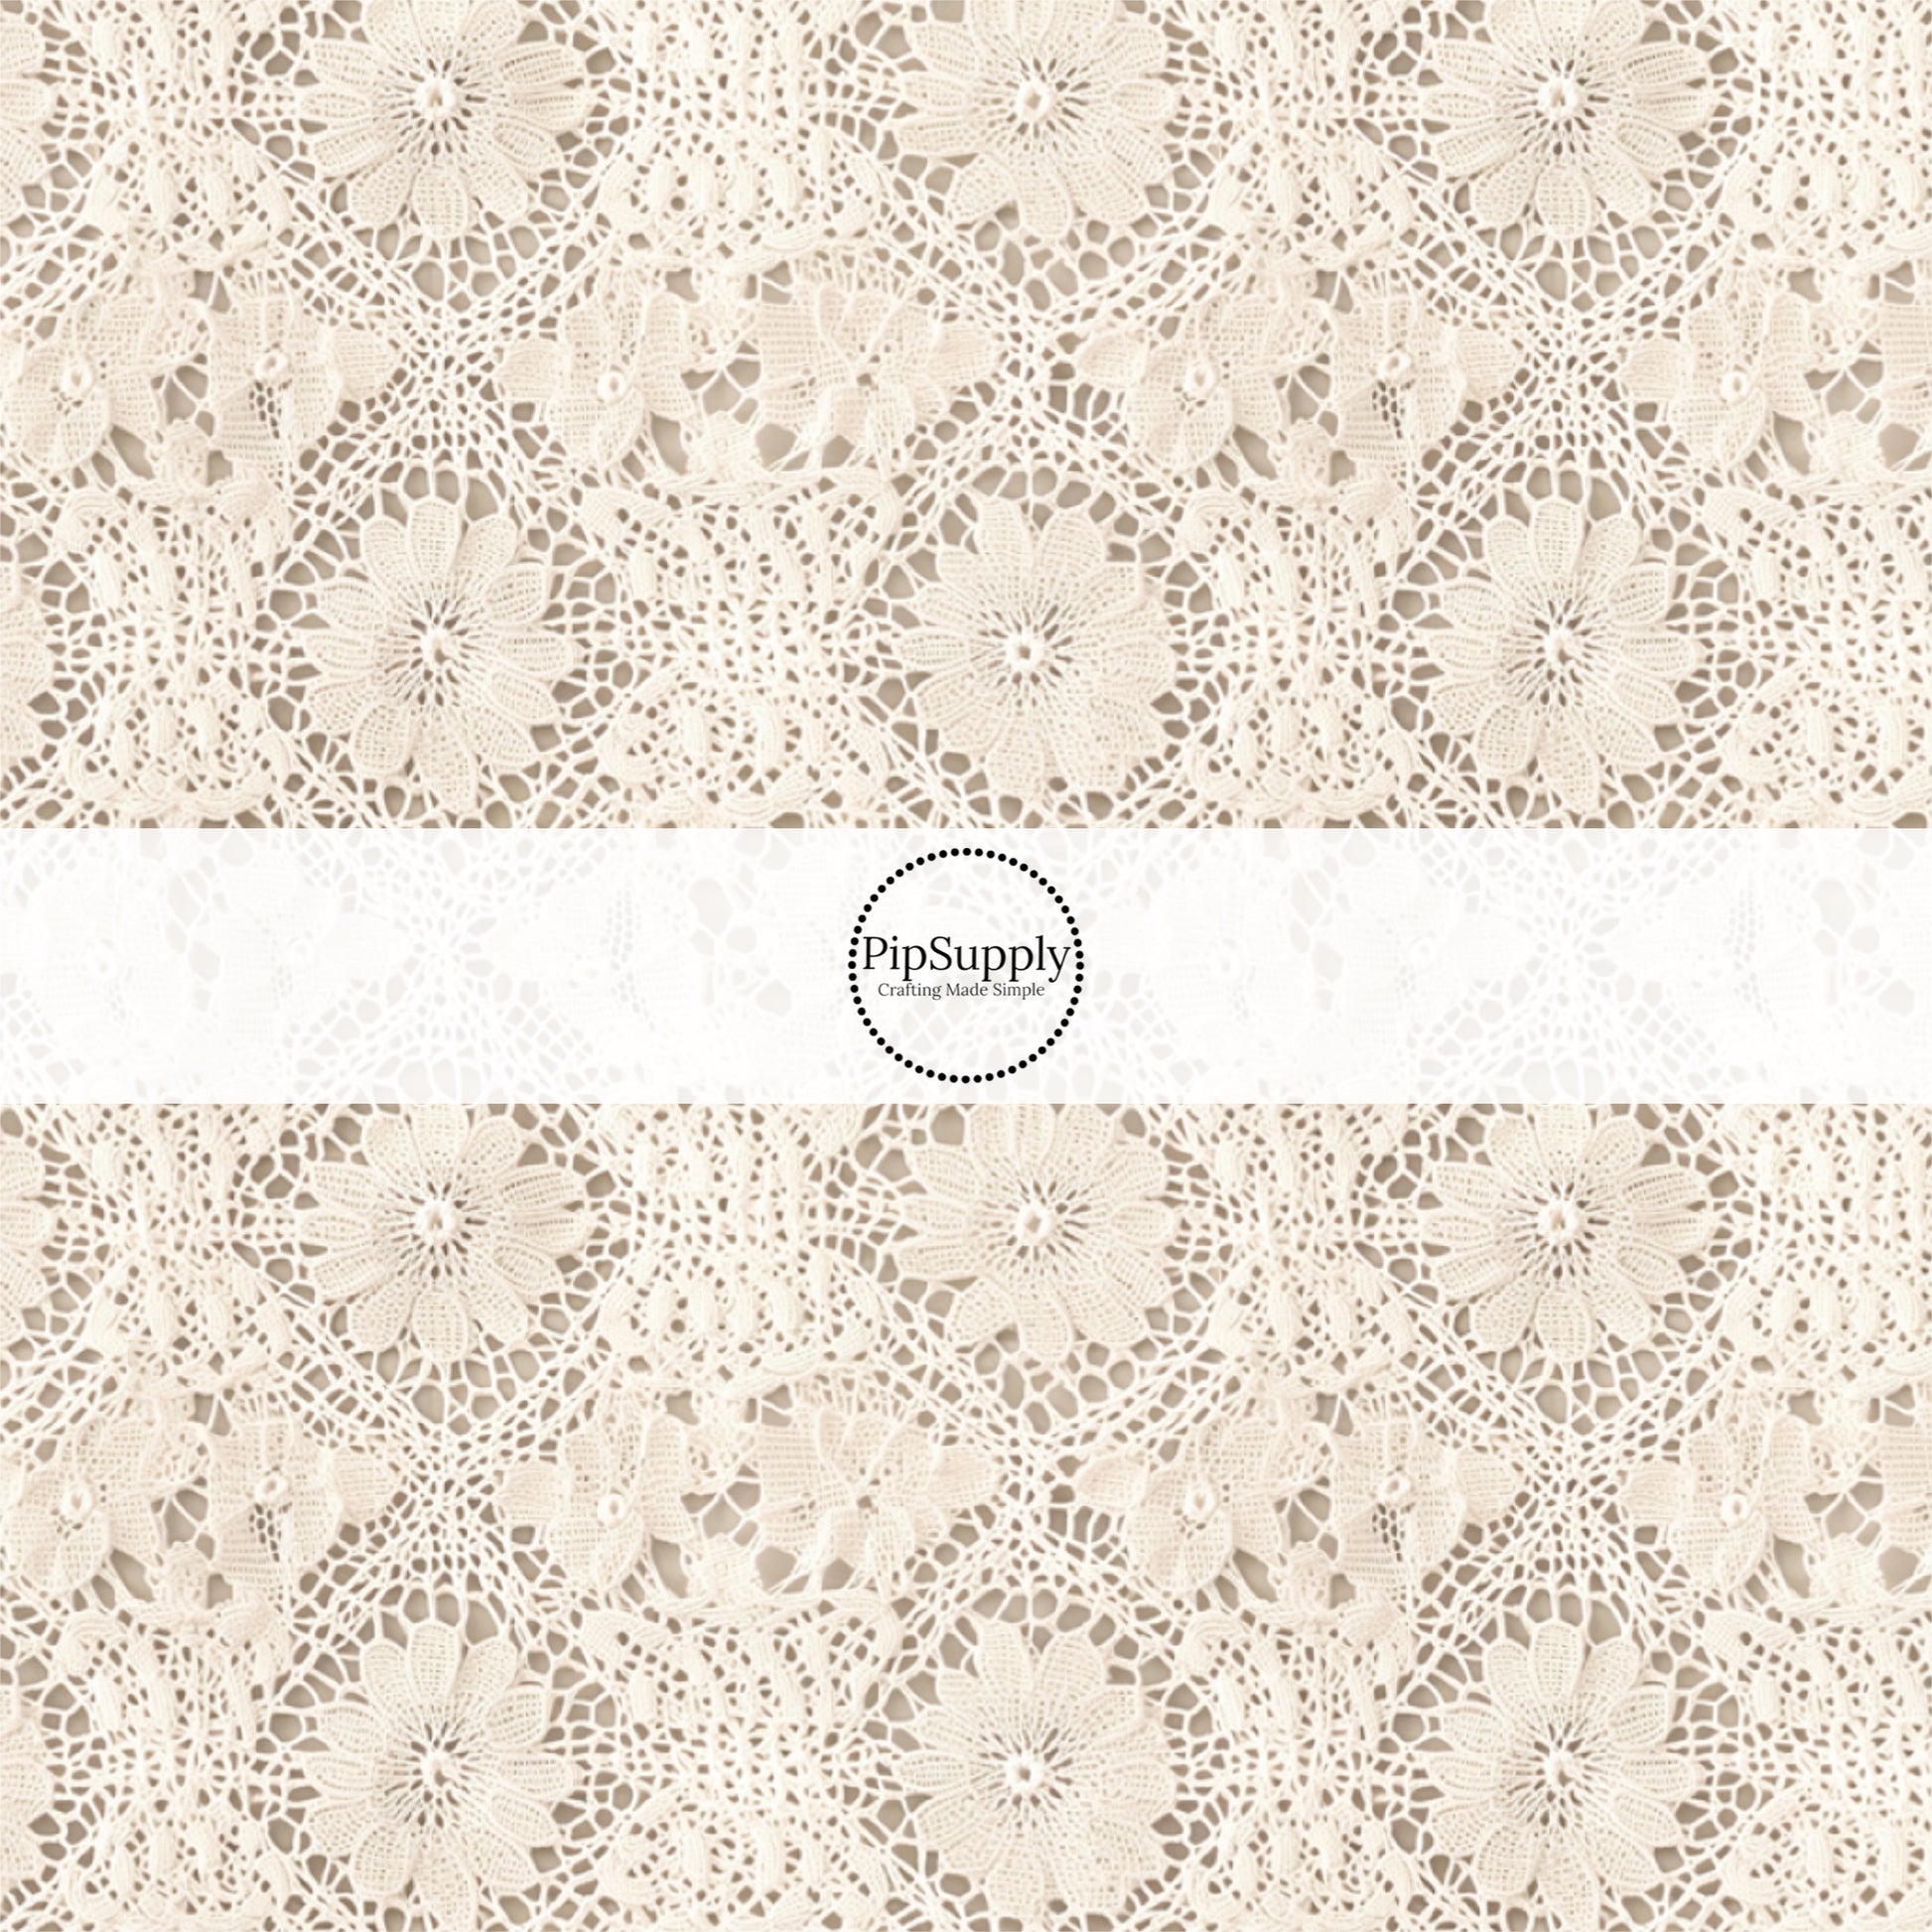 This cream lace pattern fabric by the yard features doily lace. This fun summer themed fabric can be used for all your sewing and crafting needs! **These patterns are not embroidered or lace material. It is just the design to give it the embroidered lace look.